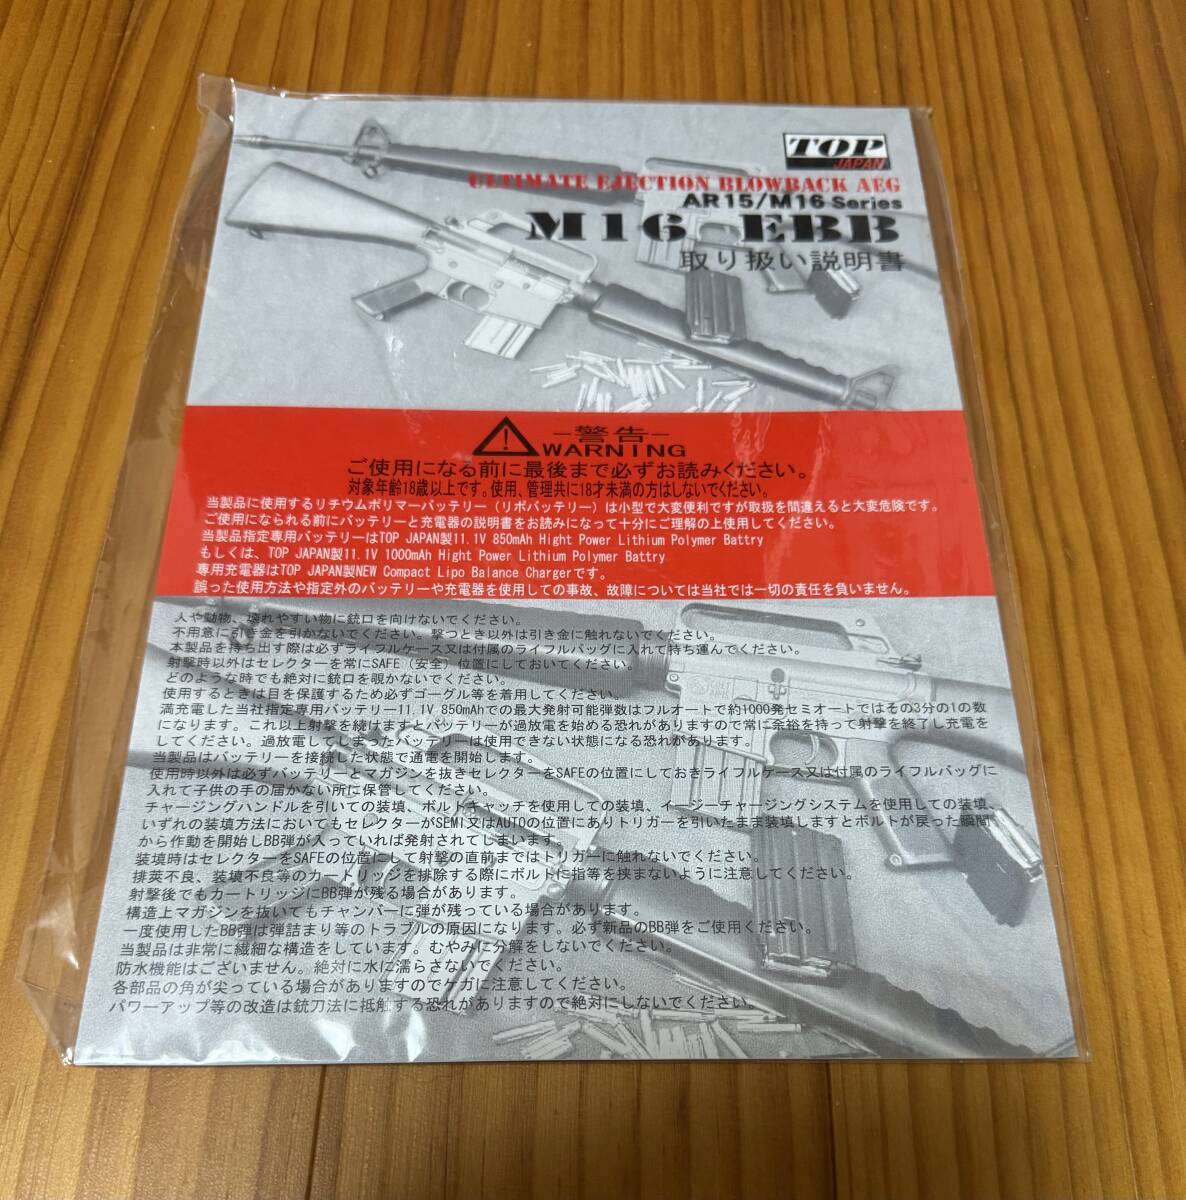 TOP JAPAN ULTIMATE EJECTION ELECTRIC BLOW BACK M16 EBB ベトナム 本体付属品セット_画像4